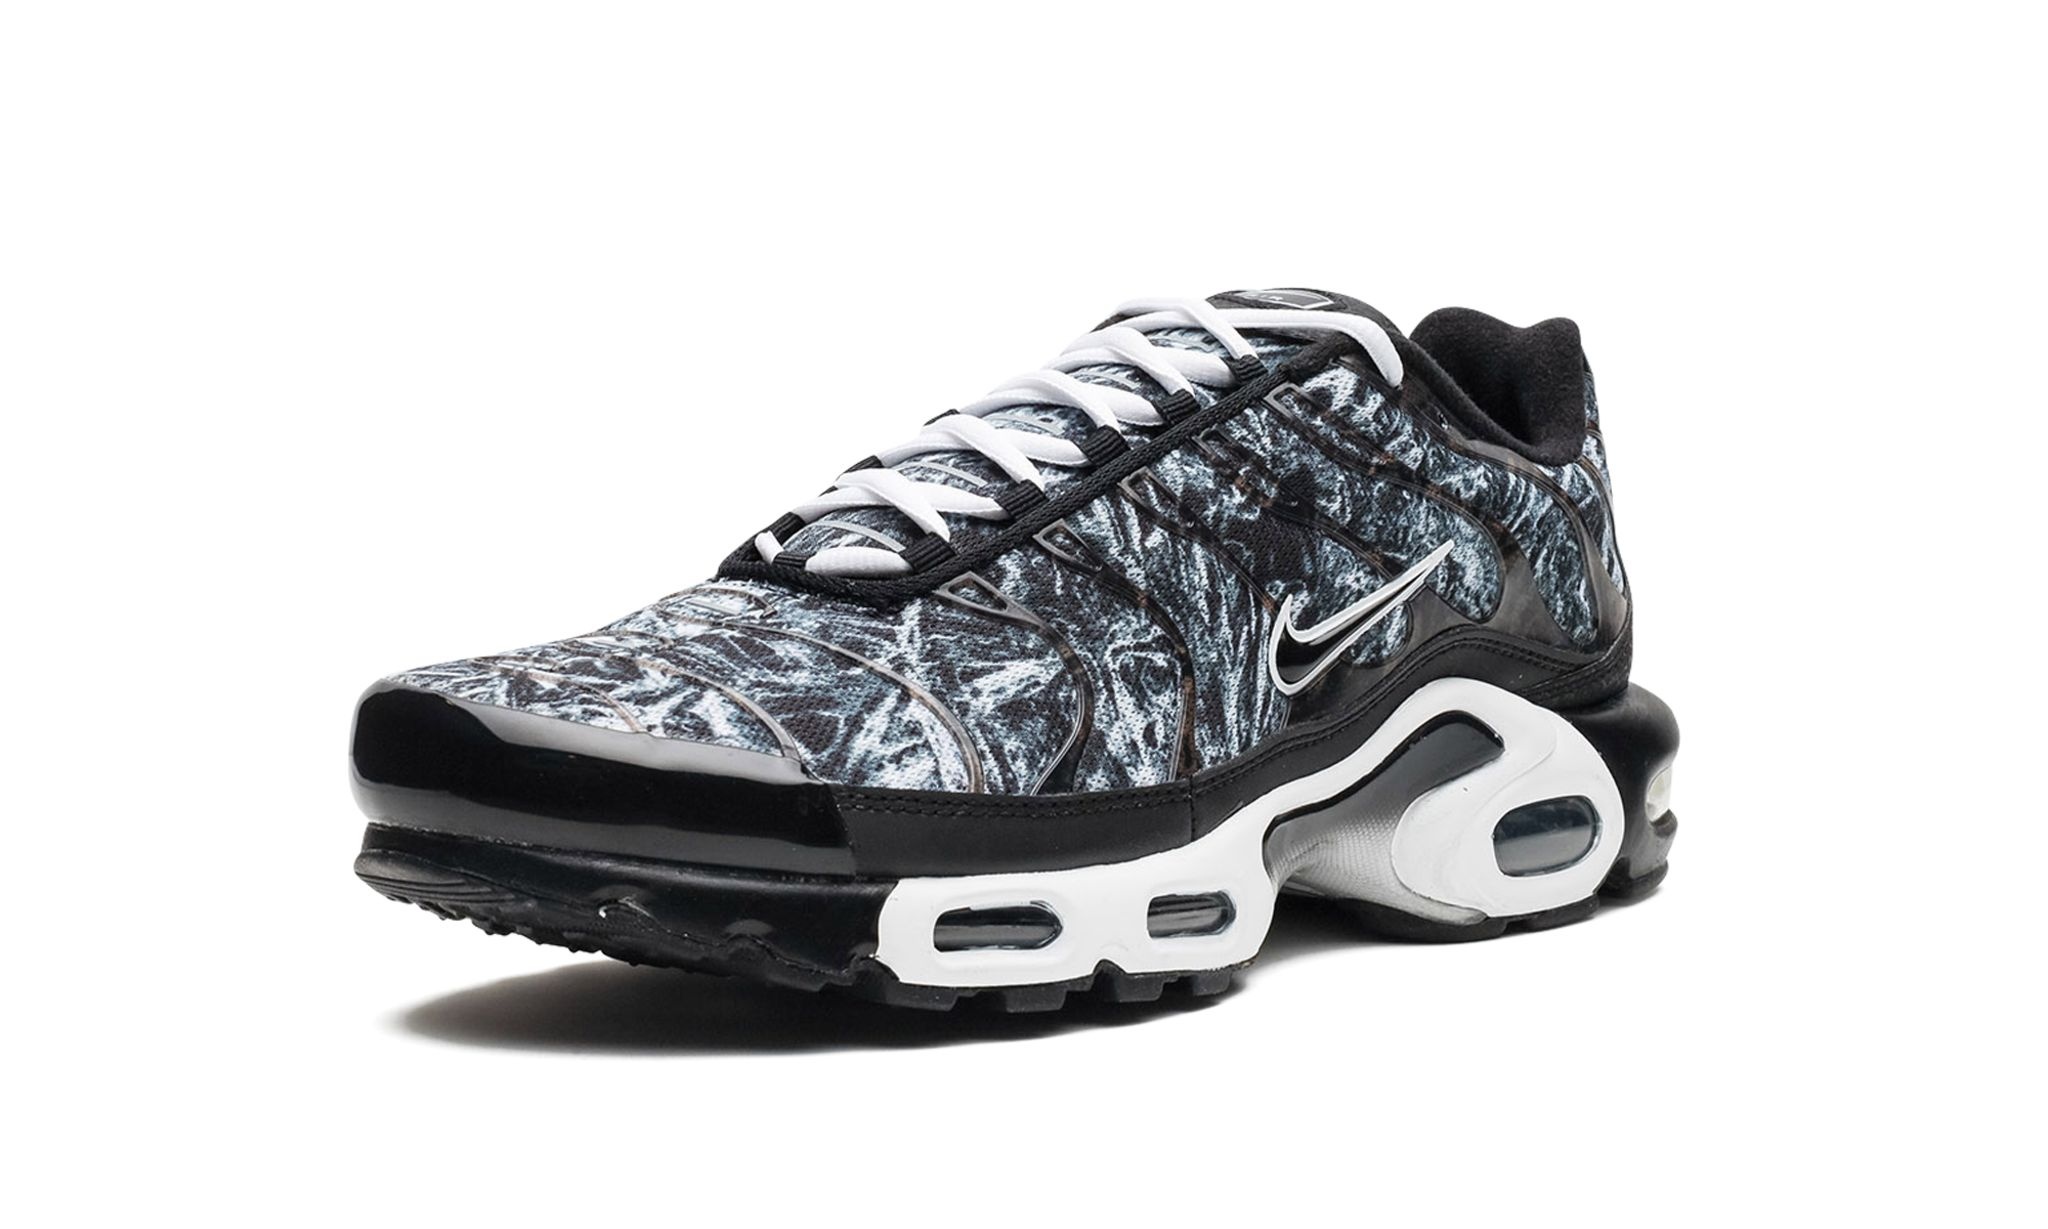 Air Max Plus AMP "Shattered Ice" - 4